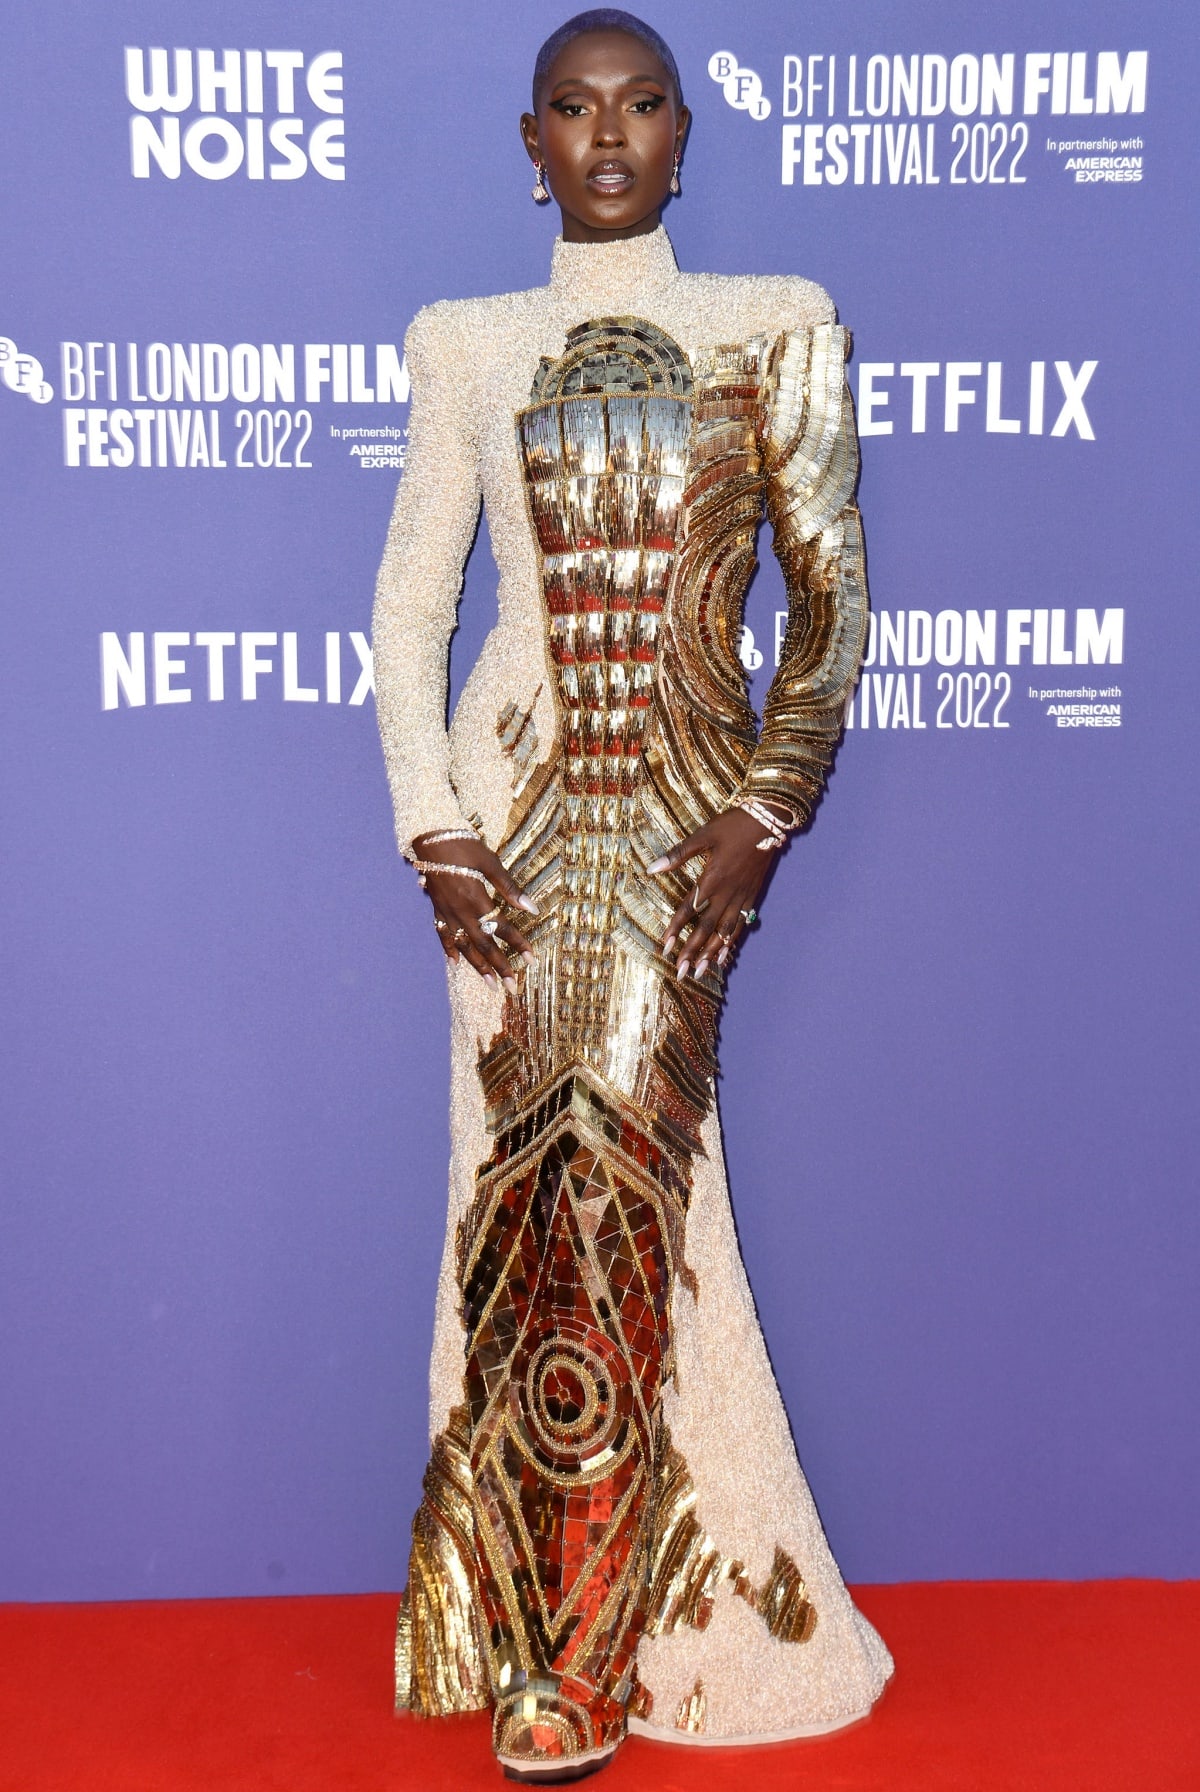 Jodie Turner-Smith wearing a sculpted gold Balmain couture gown at the White Noise premiere